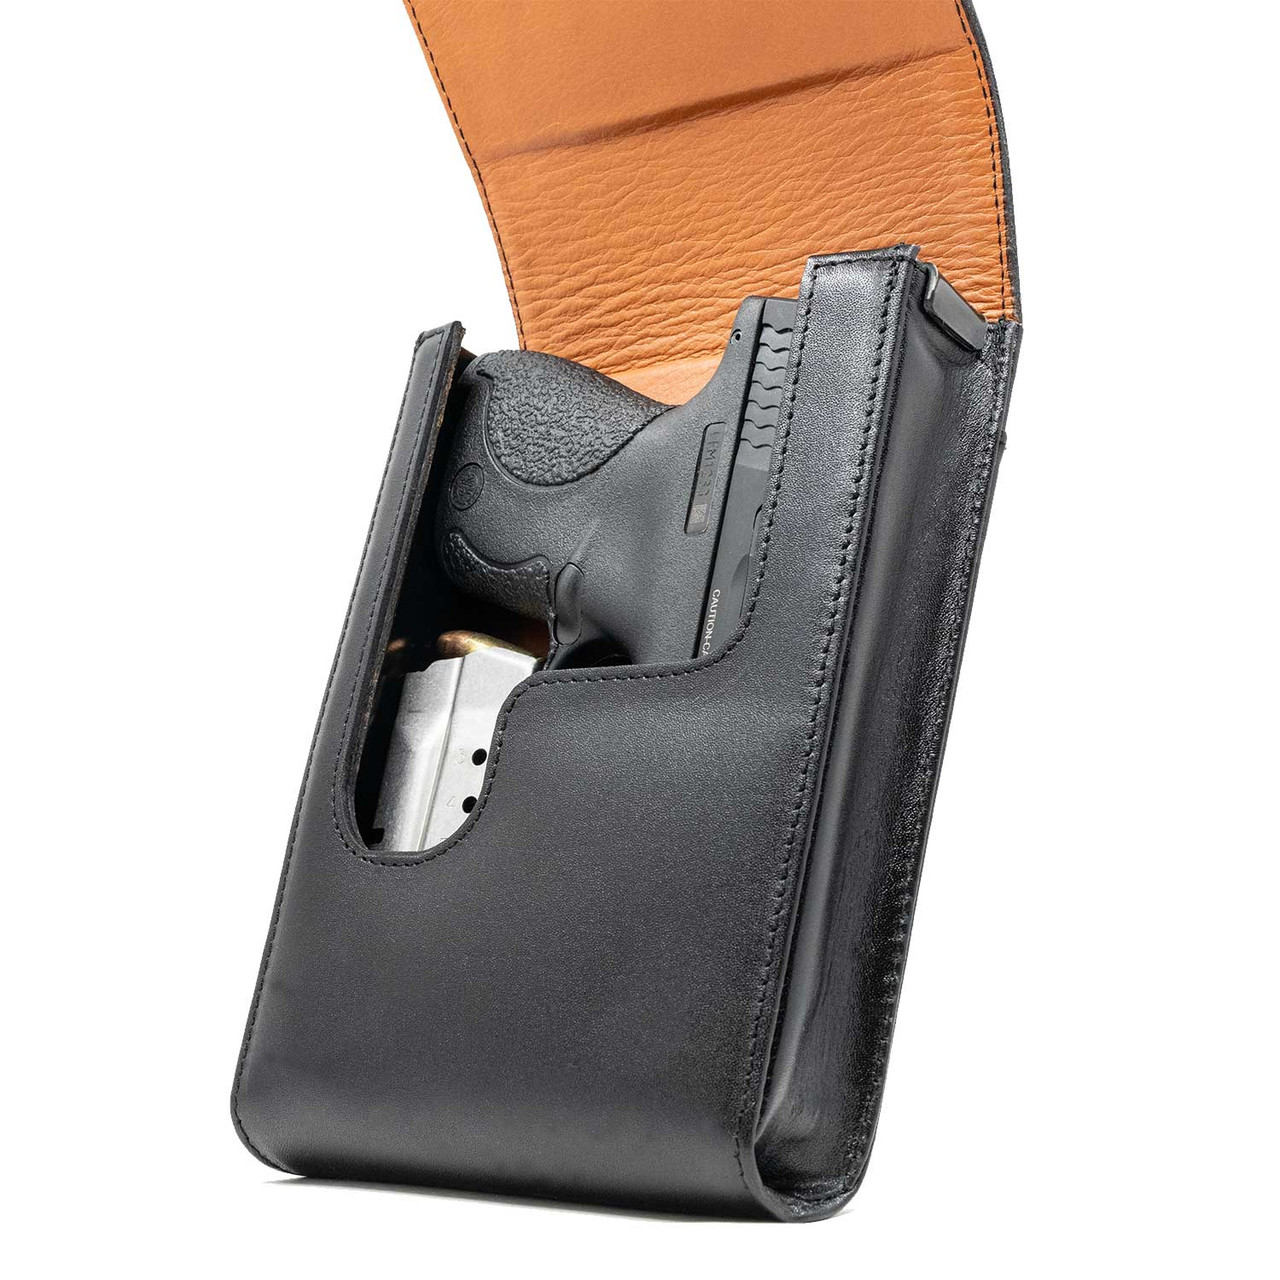 The Taurus 740 Xtra Mag Black Leather Holster